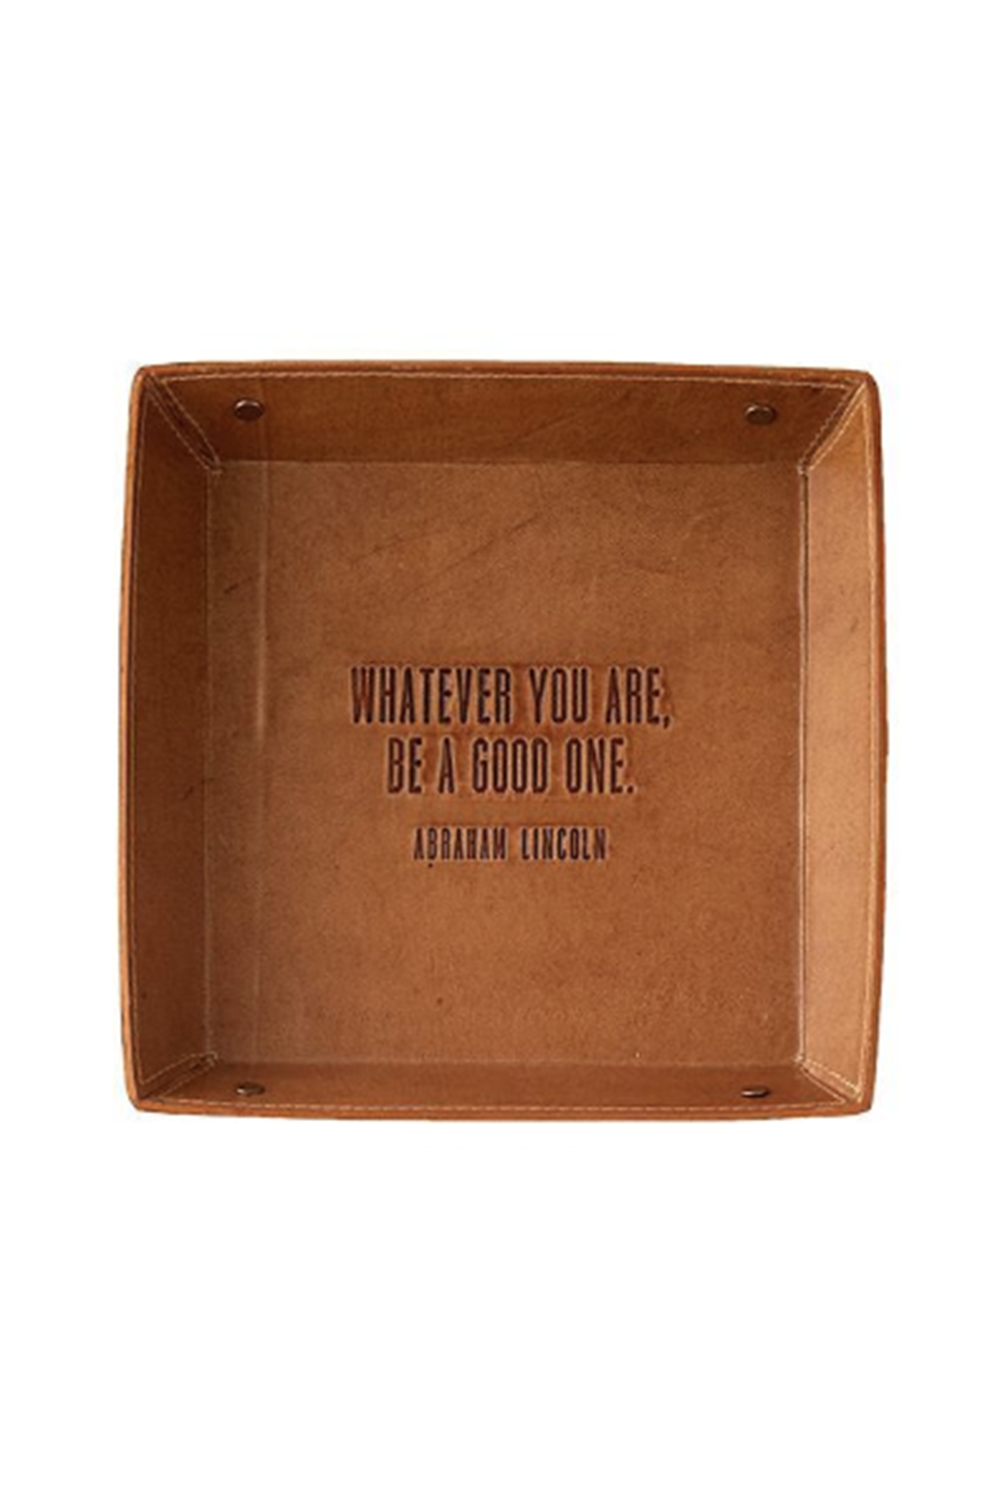 Leather Desk Tray - Whatever You Are